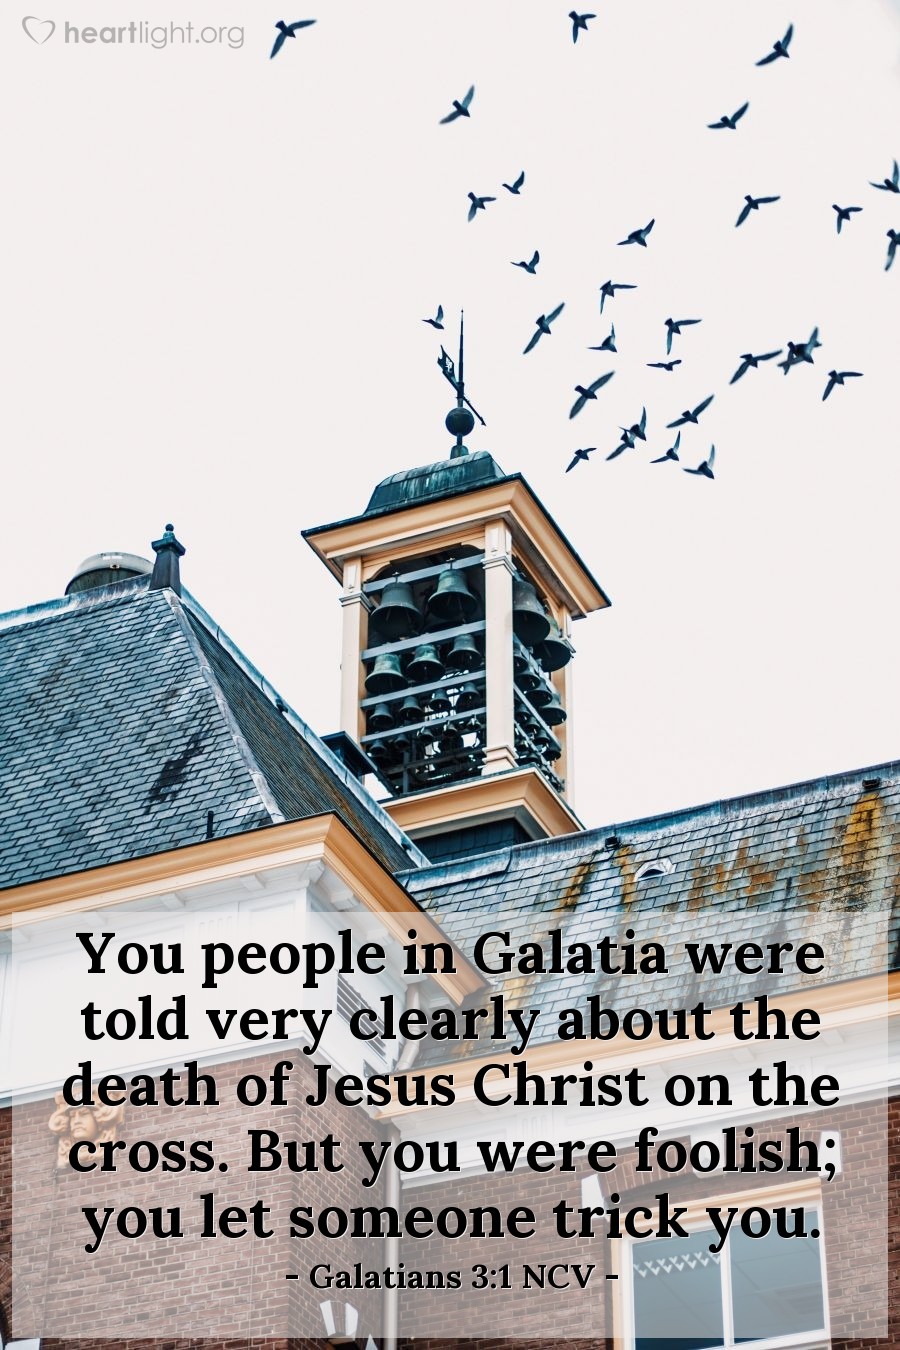 Illustration of Galatians 3:1 NCV — You people in Galatia were told very clearly about the death of Jesus Christ on the cross. But you were foolish; you let someone trick you.